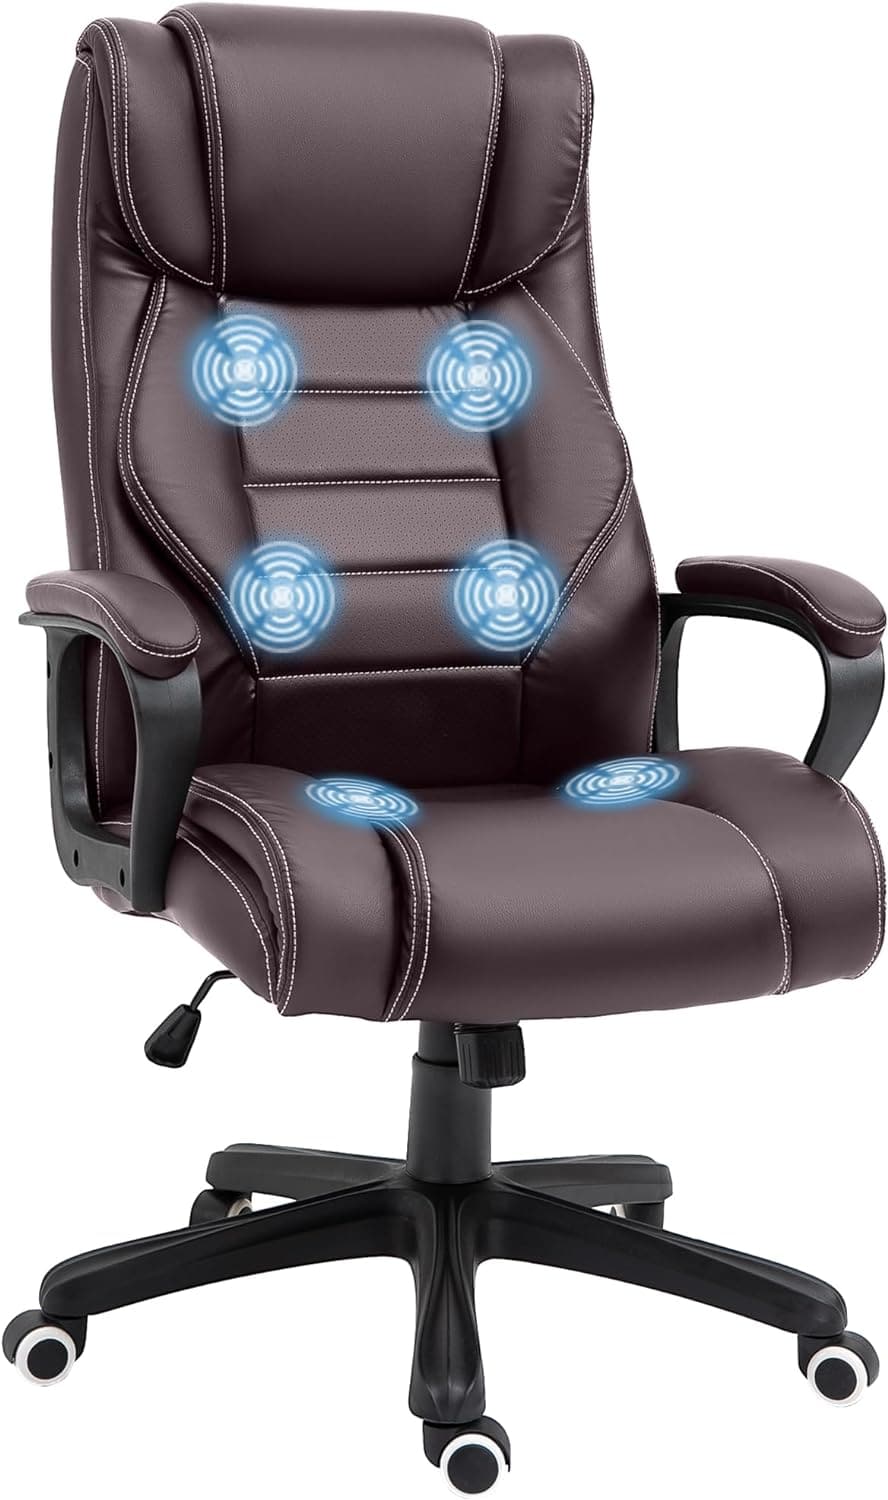 ProperAV Extra Ergonomic High Back Tilting Executive Office Chair with 6-Point Vibration Massage Function (Brown)